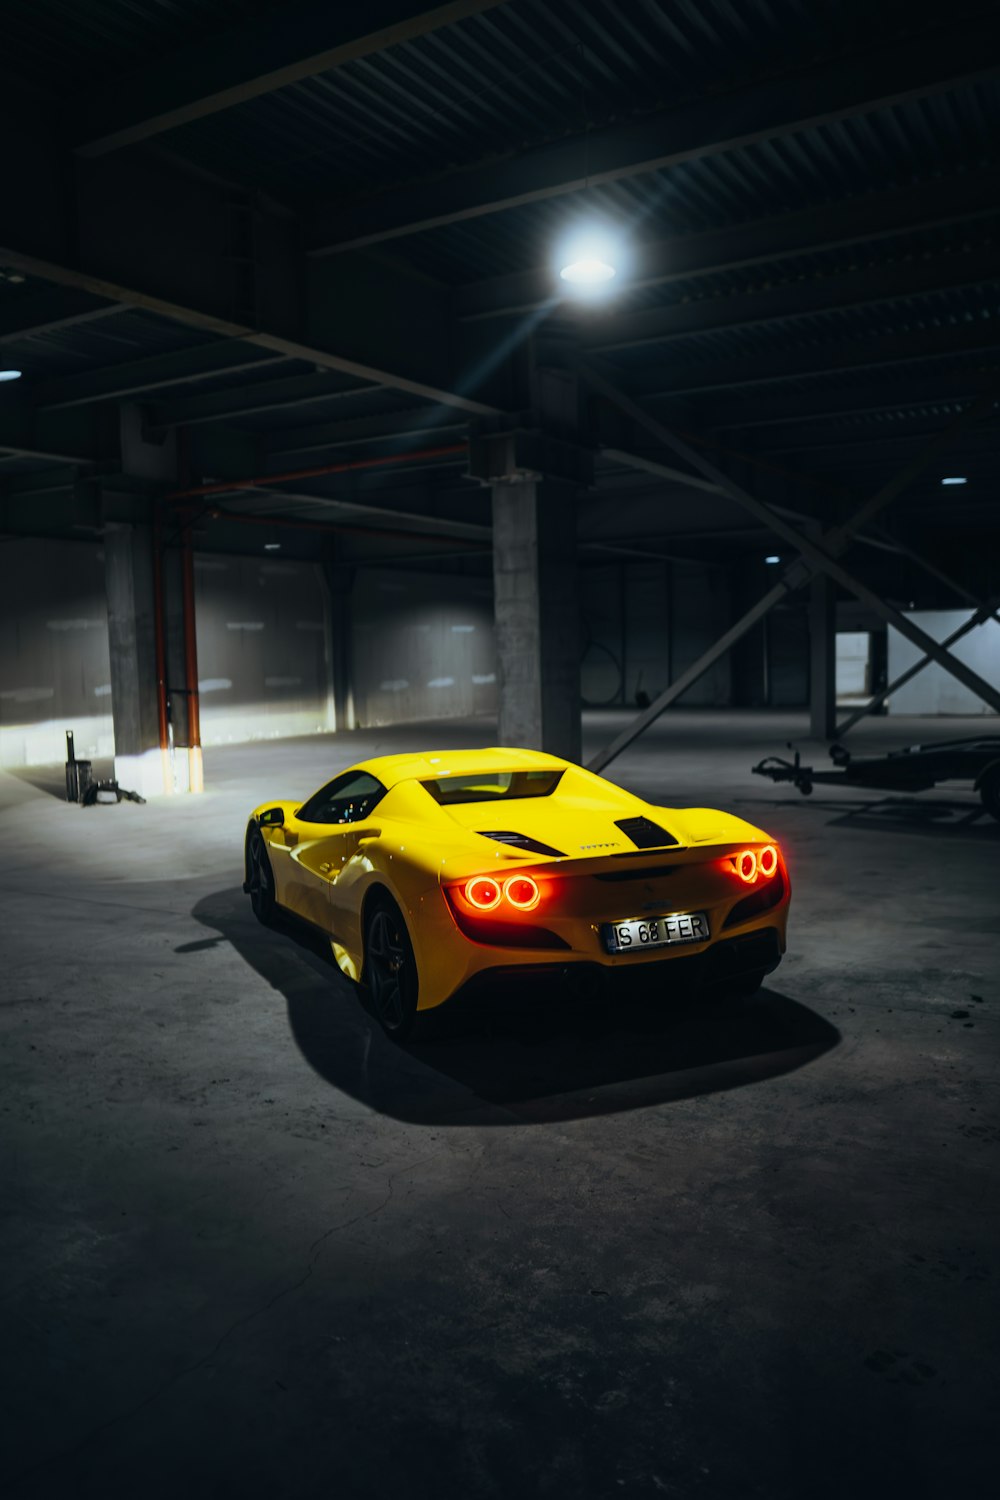 a yellow sports car parked in a parking garage